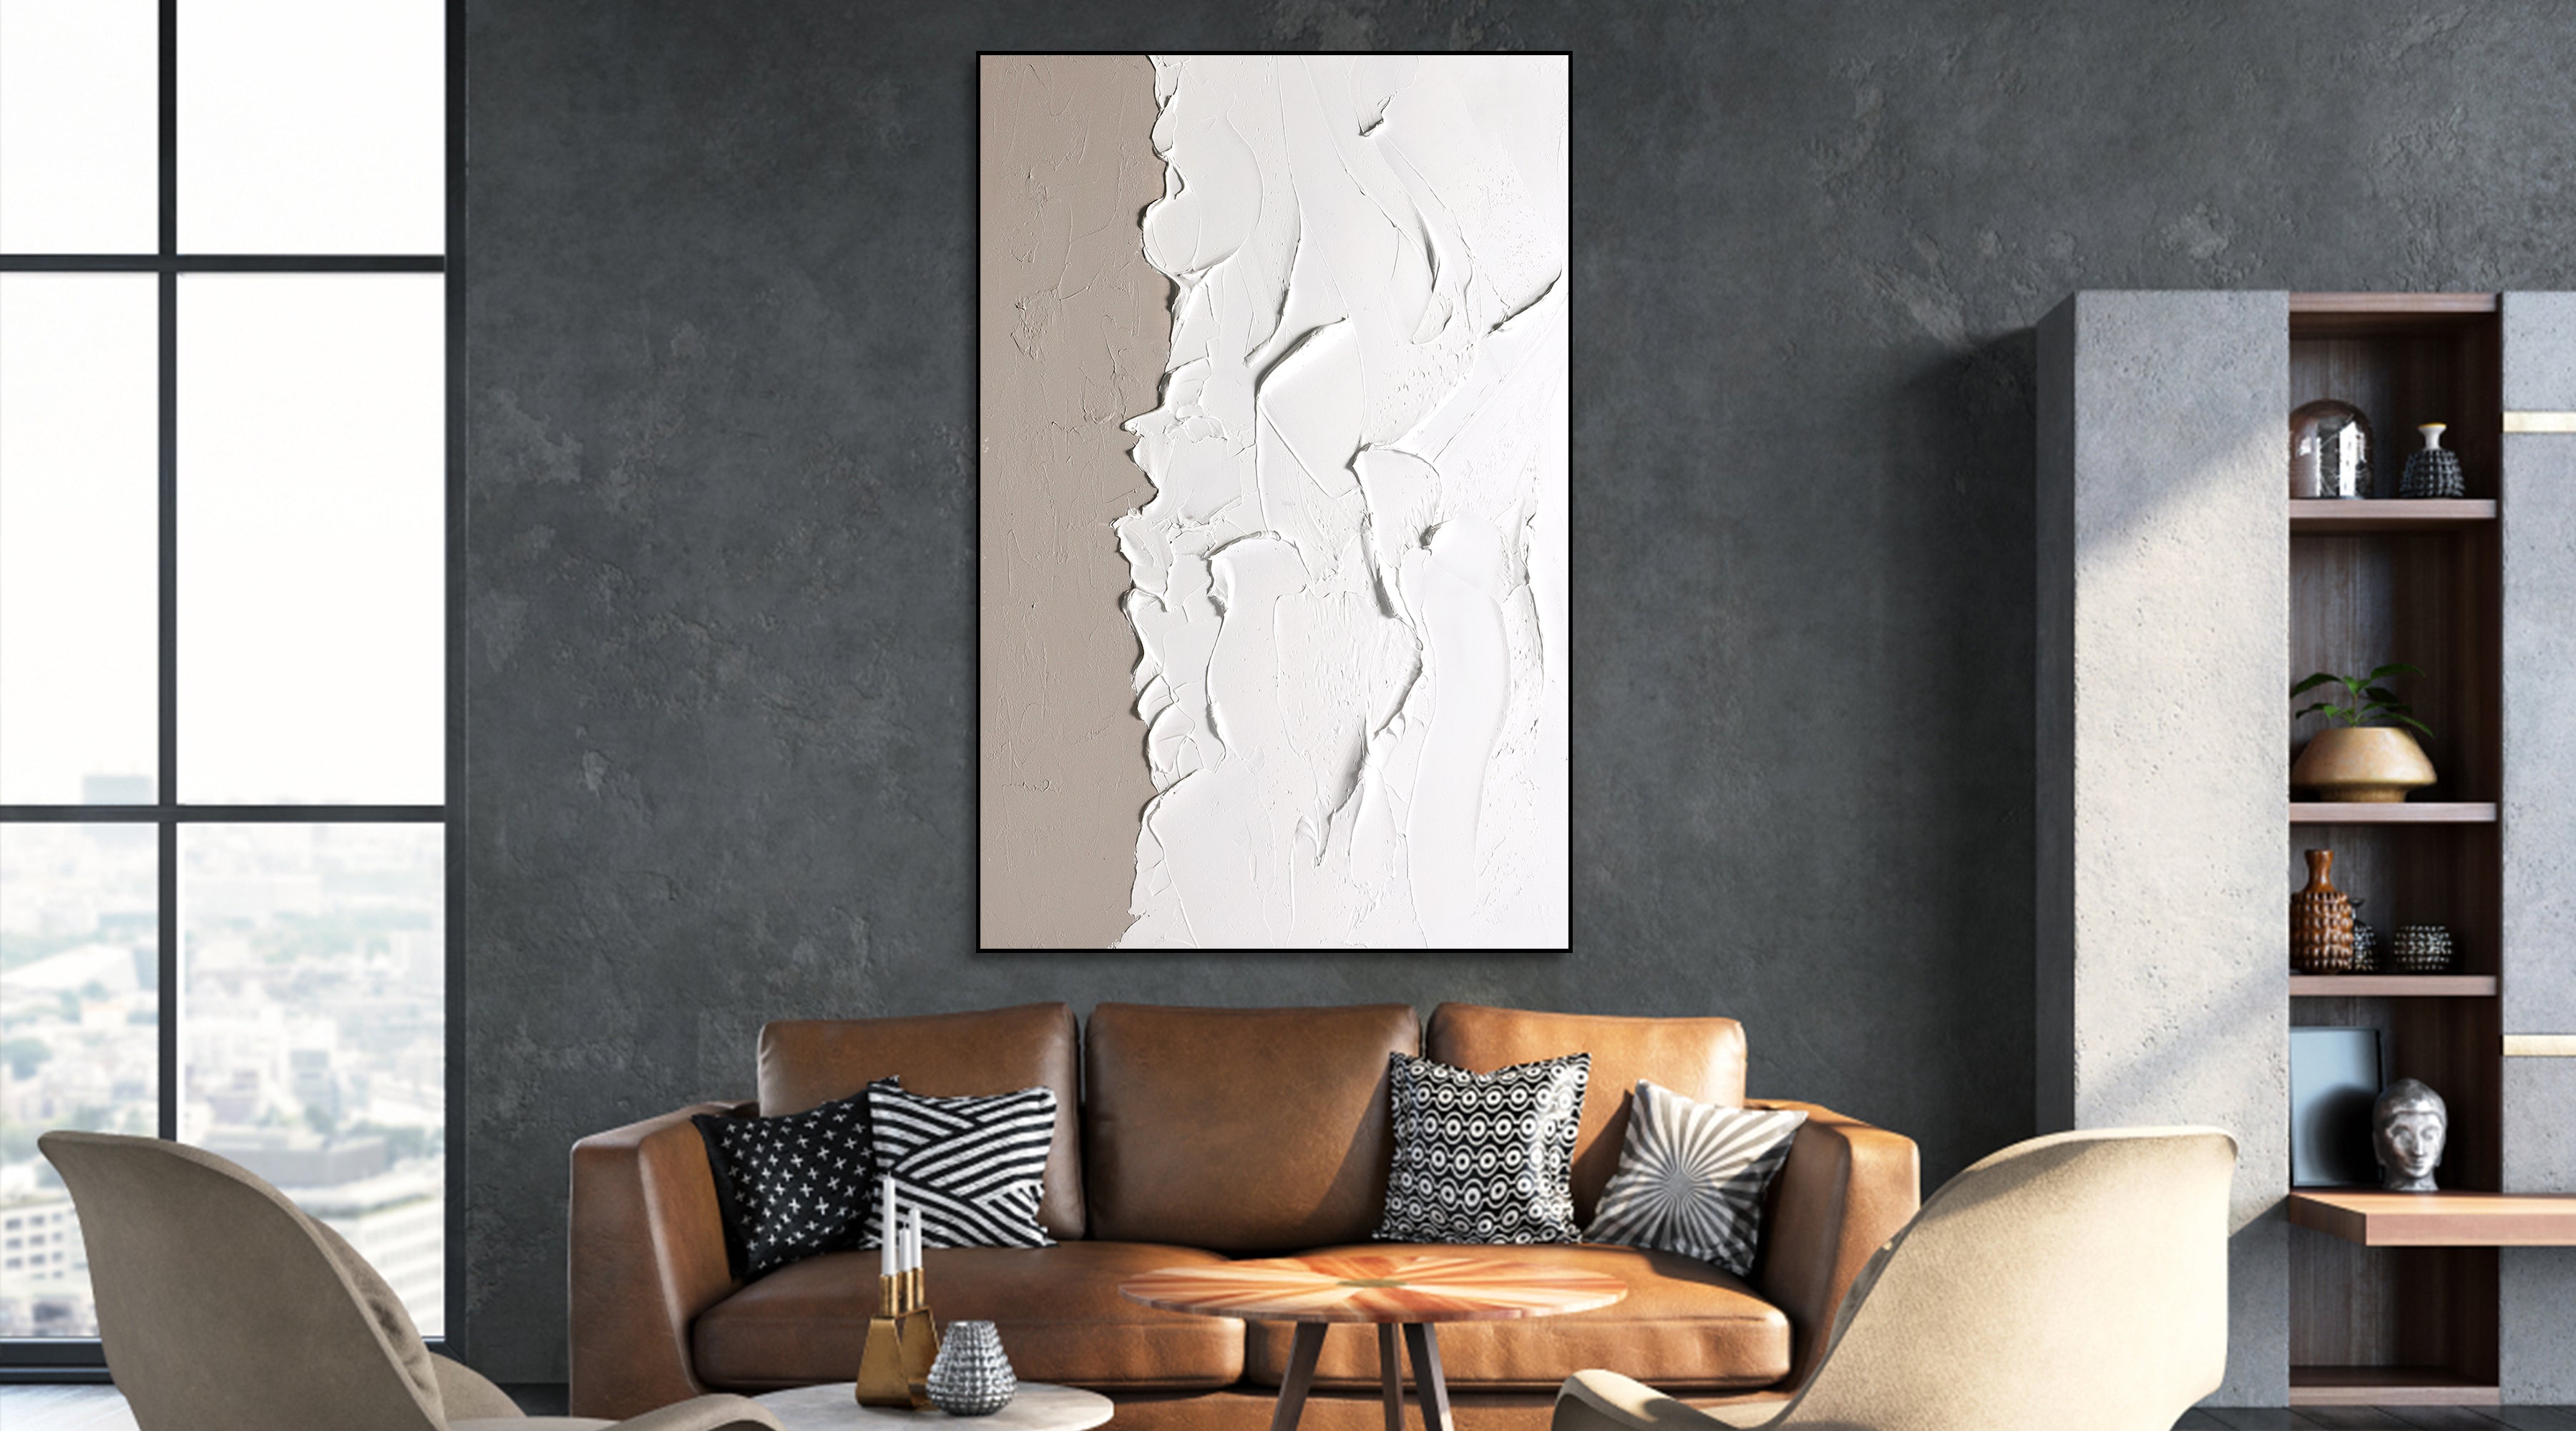 White & Gray River texture abstract artwork #ypy006